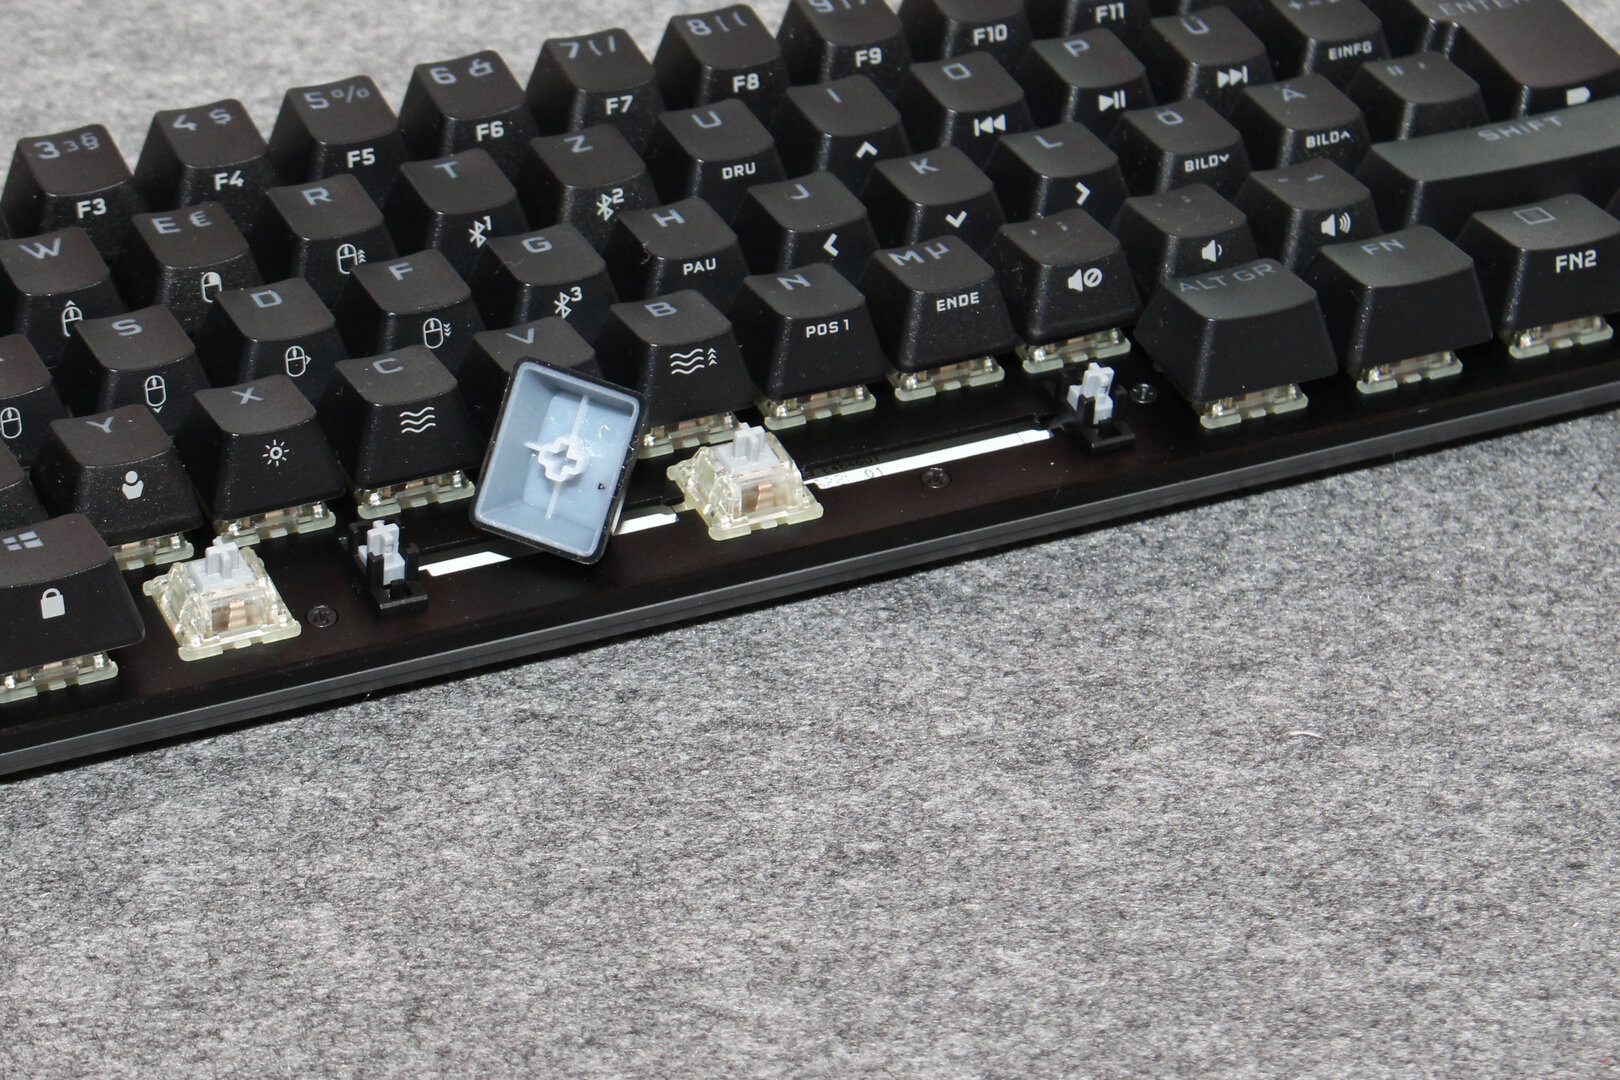 Corsair uses durable double-shot keycaps made from PBT plastic